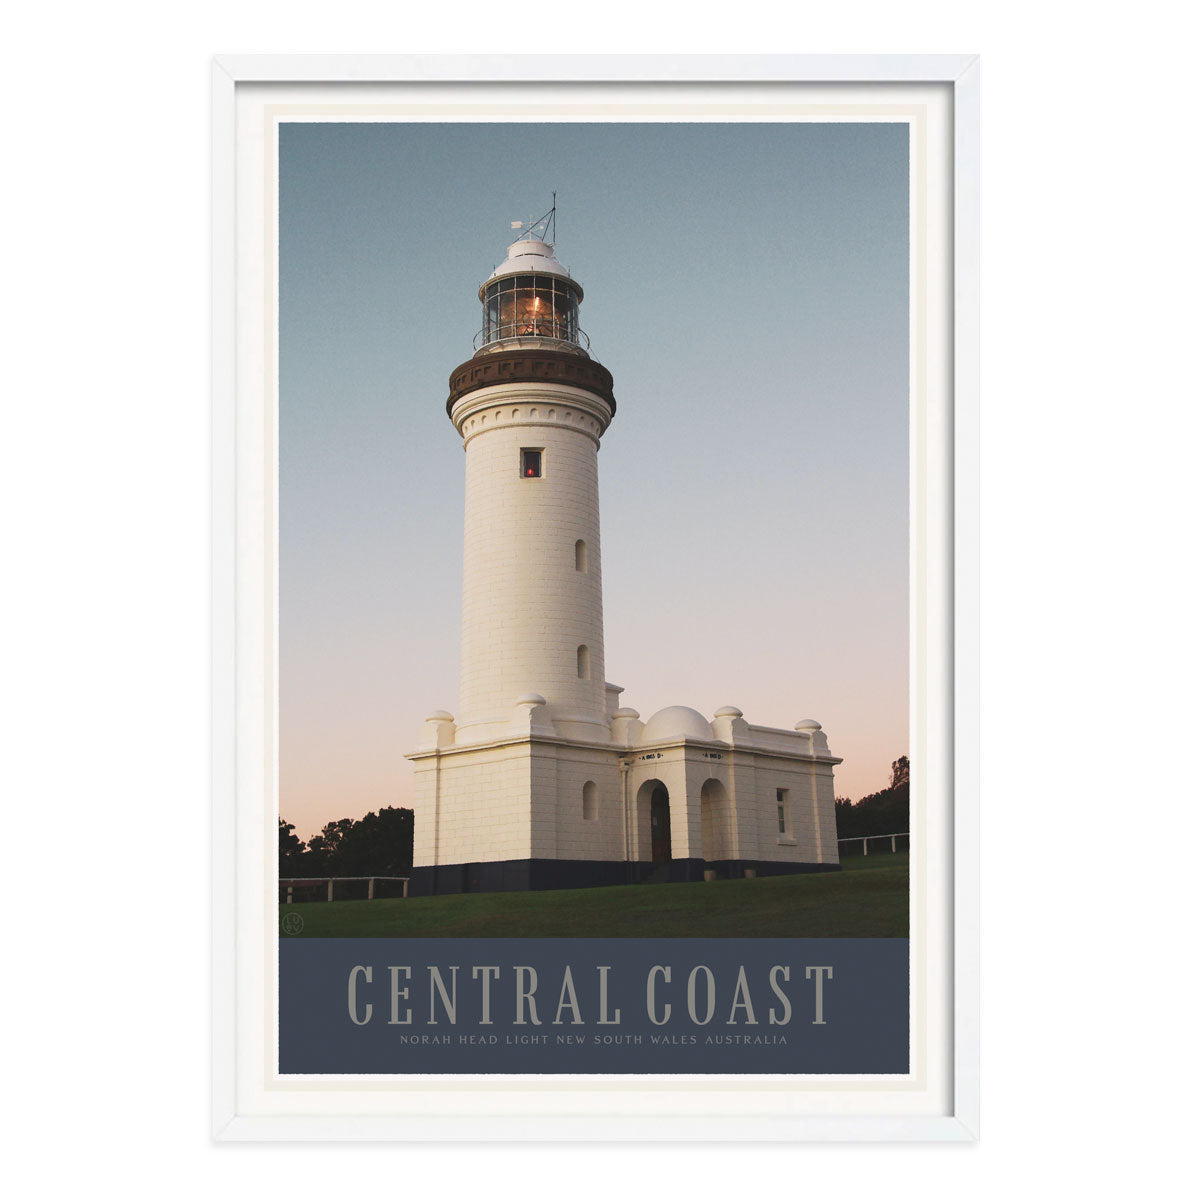 Norah Head Central Coast NSW retro vintage poster print in white frame from Places We Luv